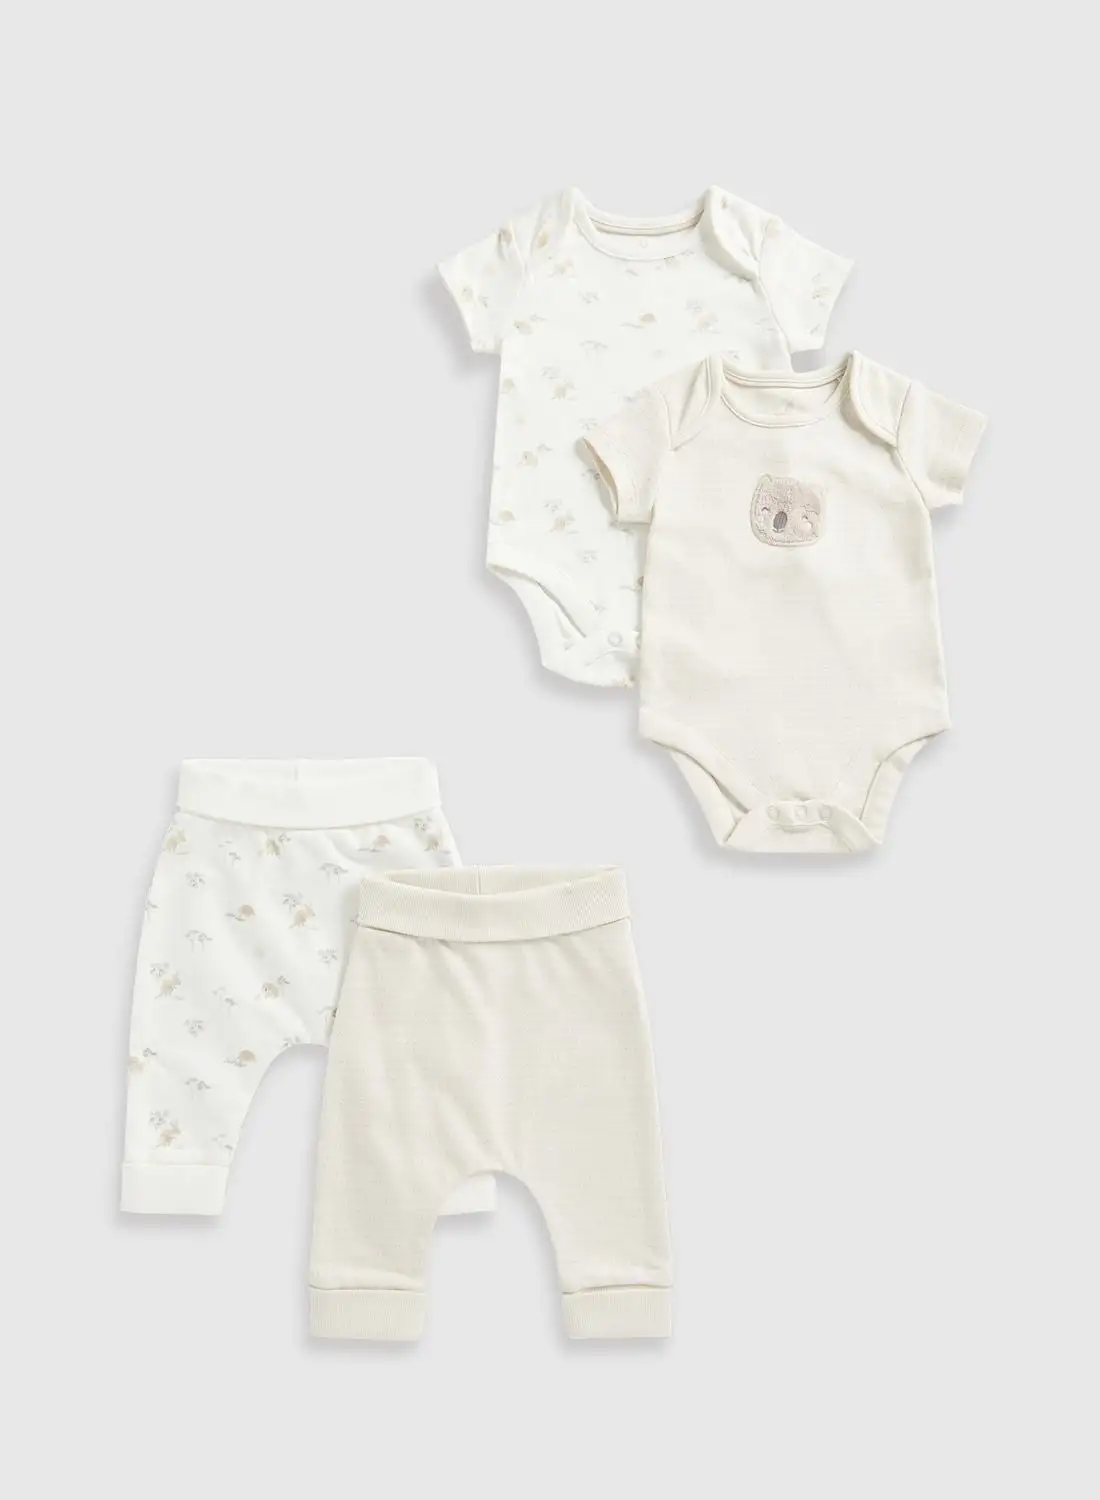 mothercare Infant 2 Set Bodysuits with pants